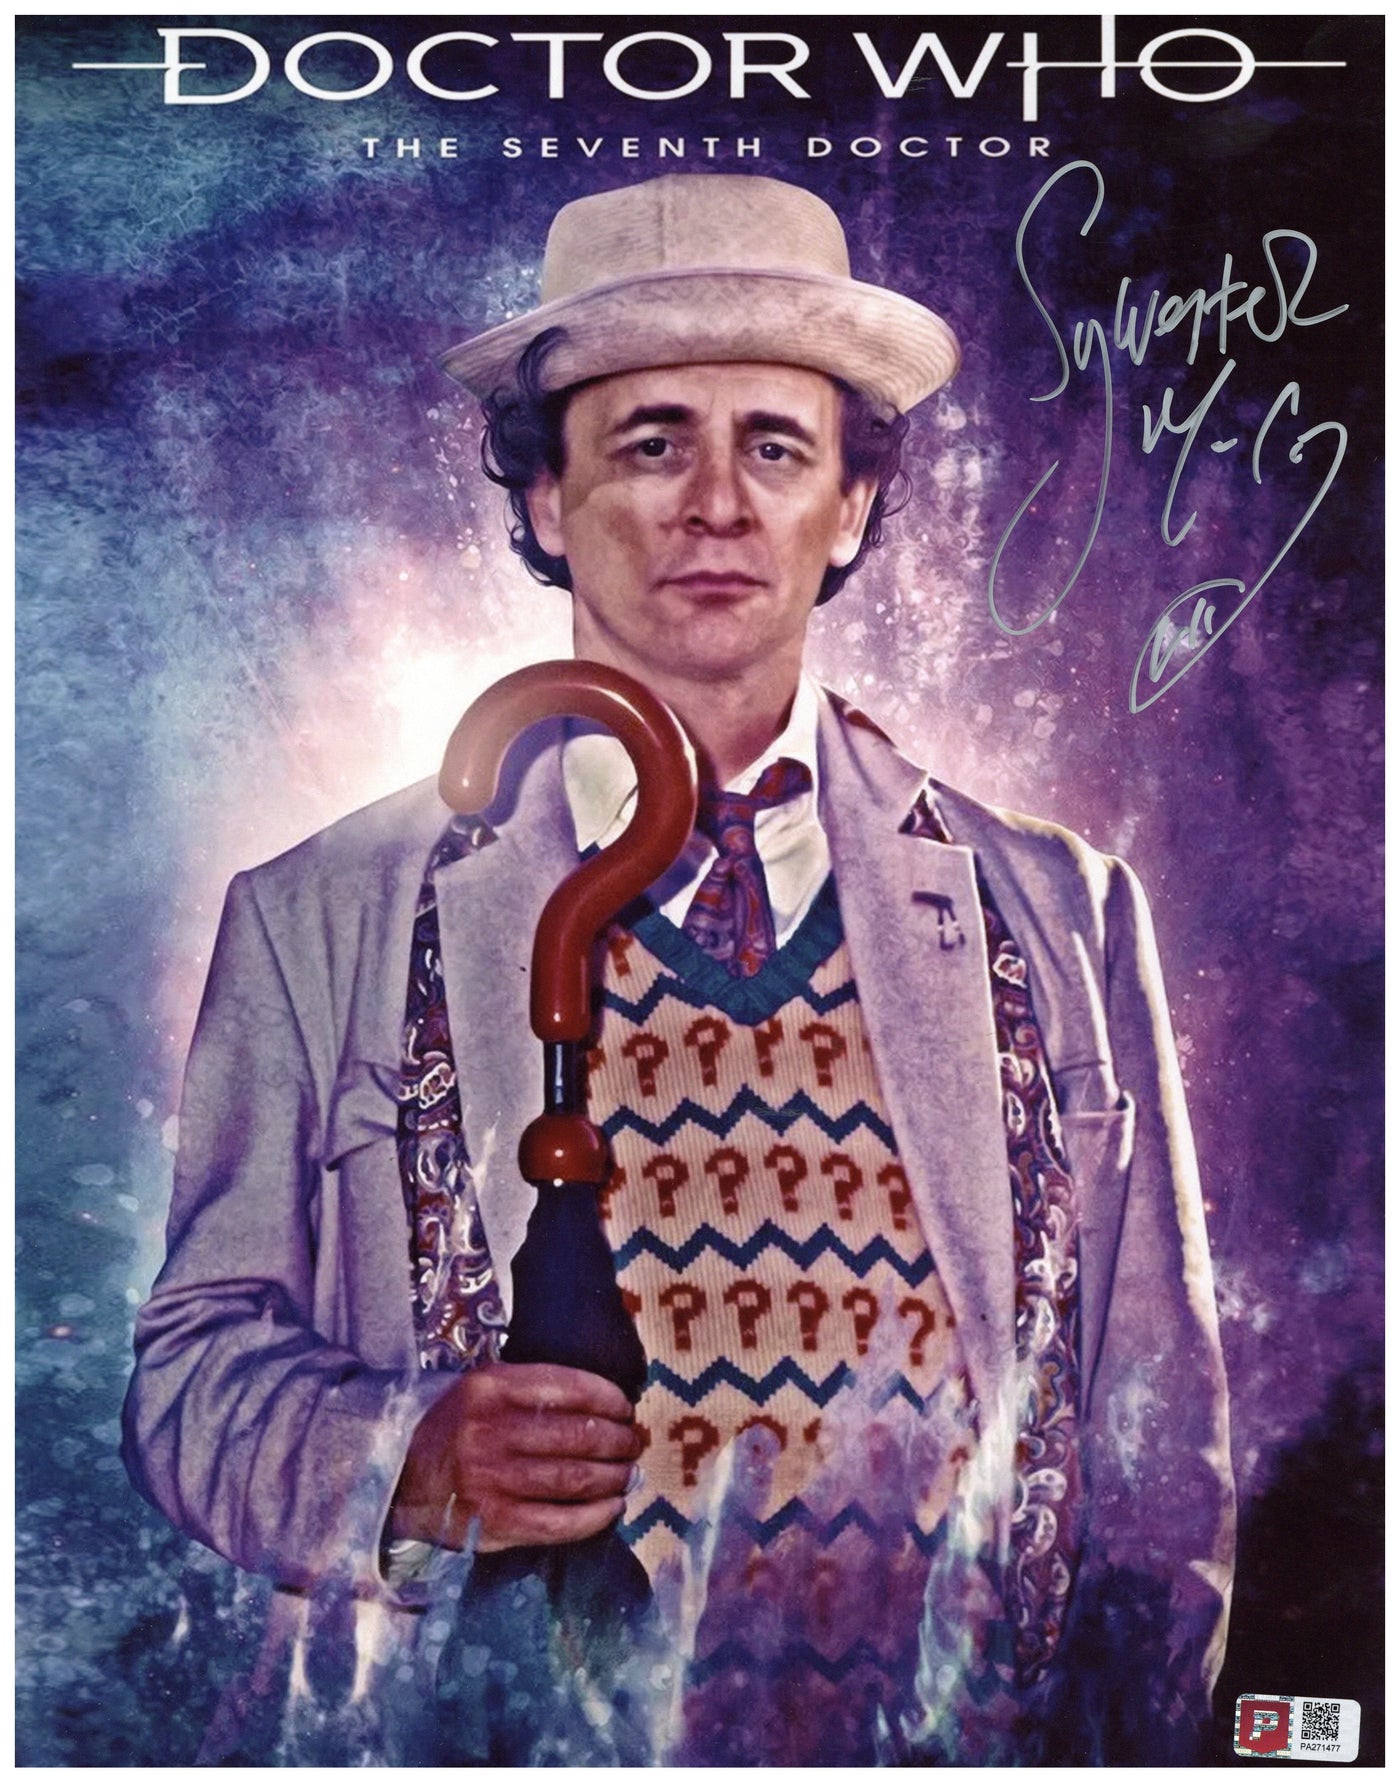 Sylvester McCoy Signed 11x14 Photo Doctor Who Autographed COA